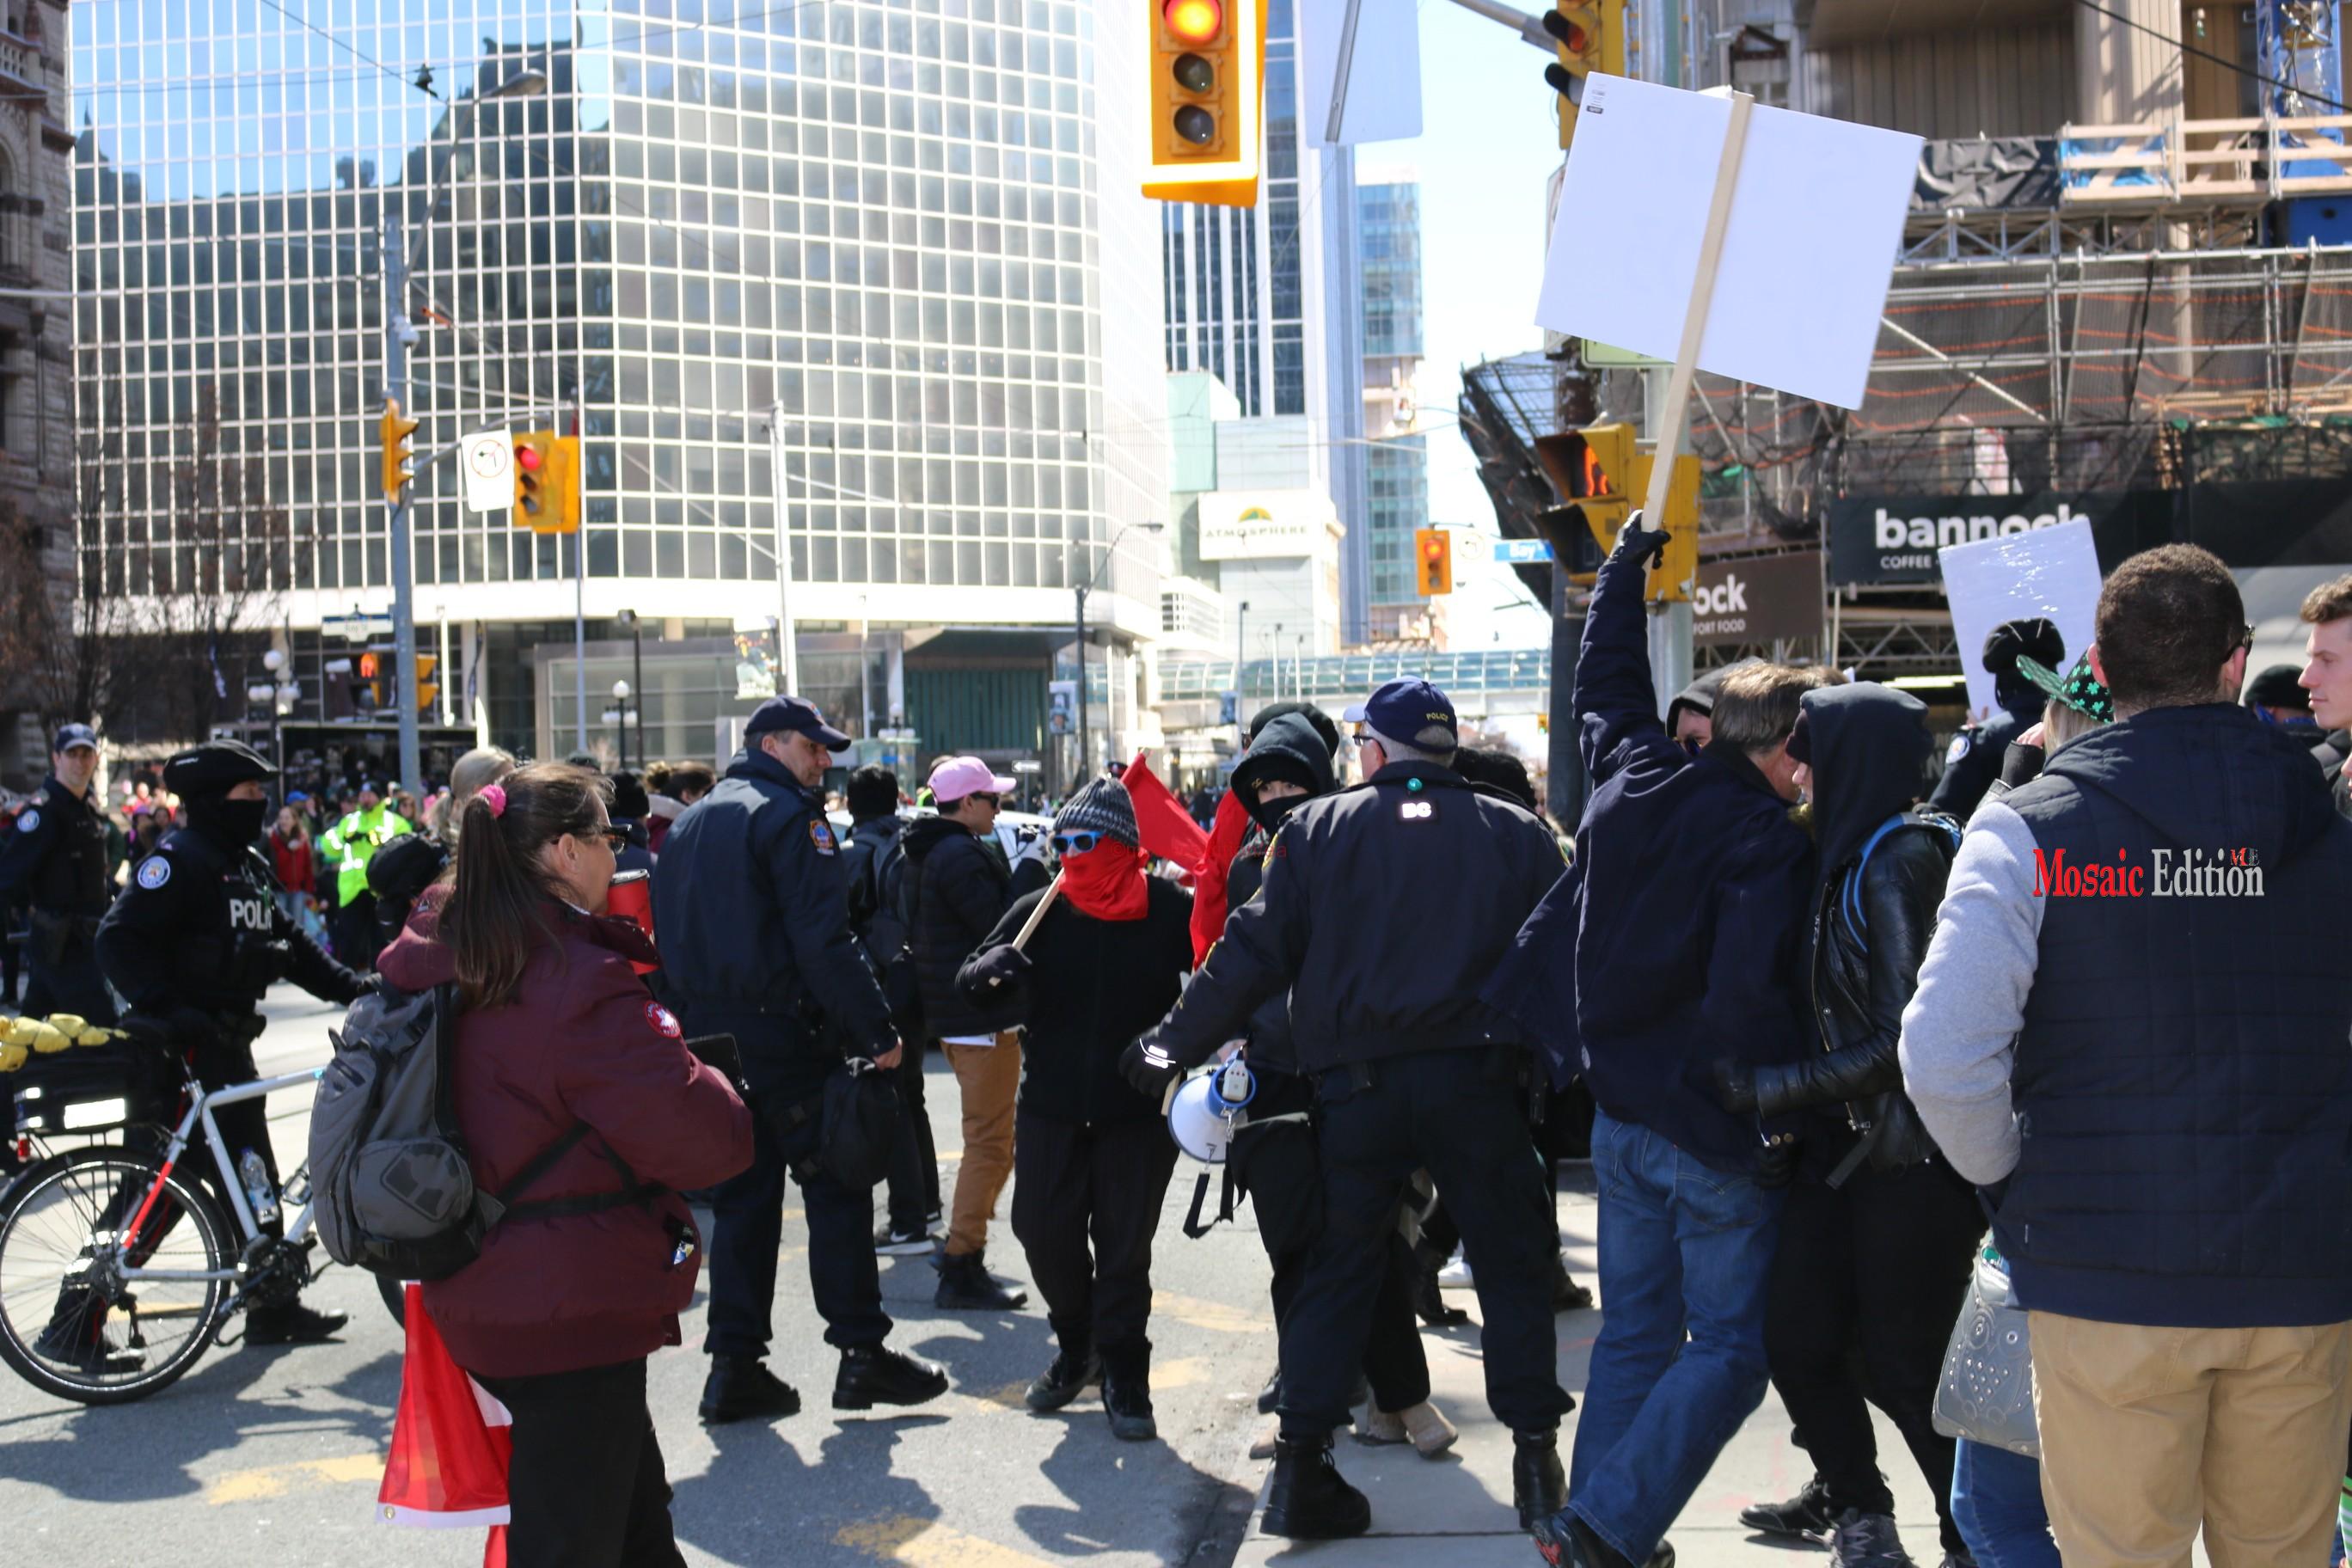 Street protest over M103 in Toronto